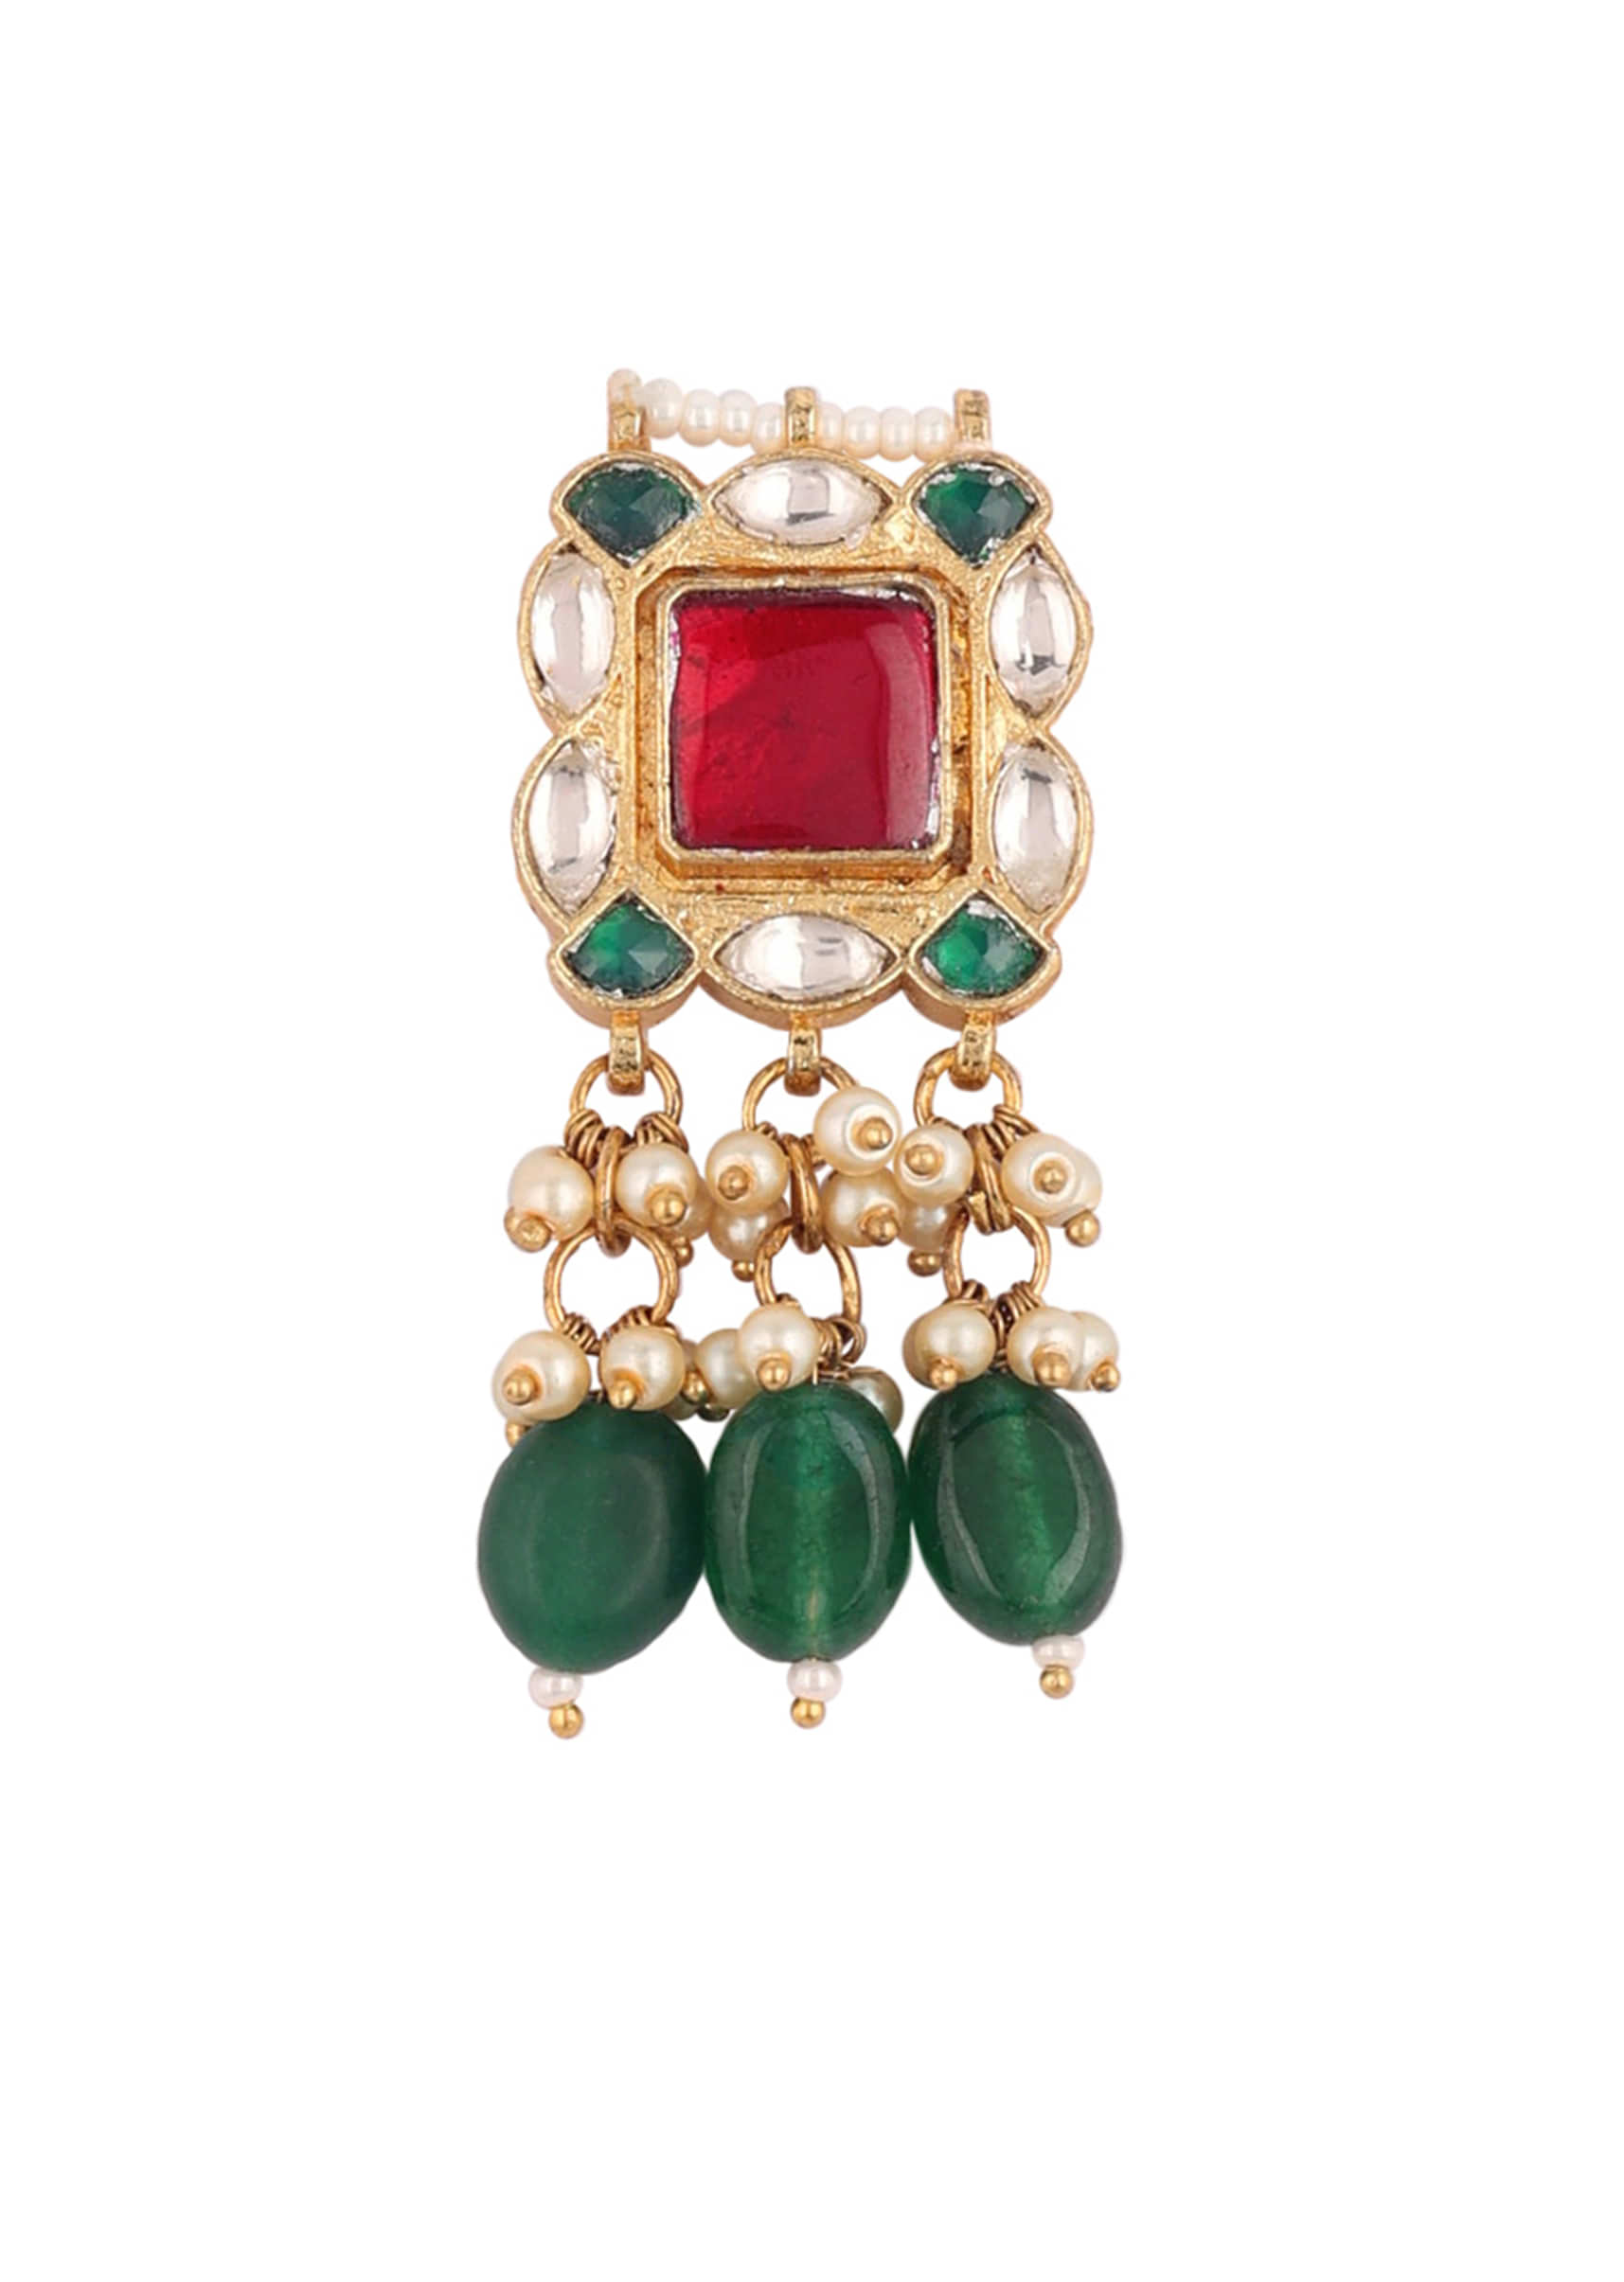 Gold Finish Kundan Polki Red And Green Choker Set With Beads And Stones